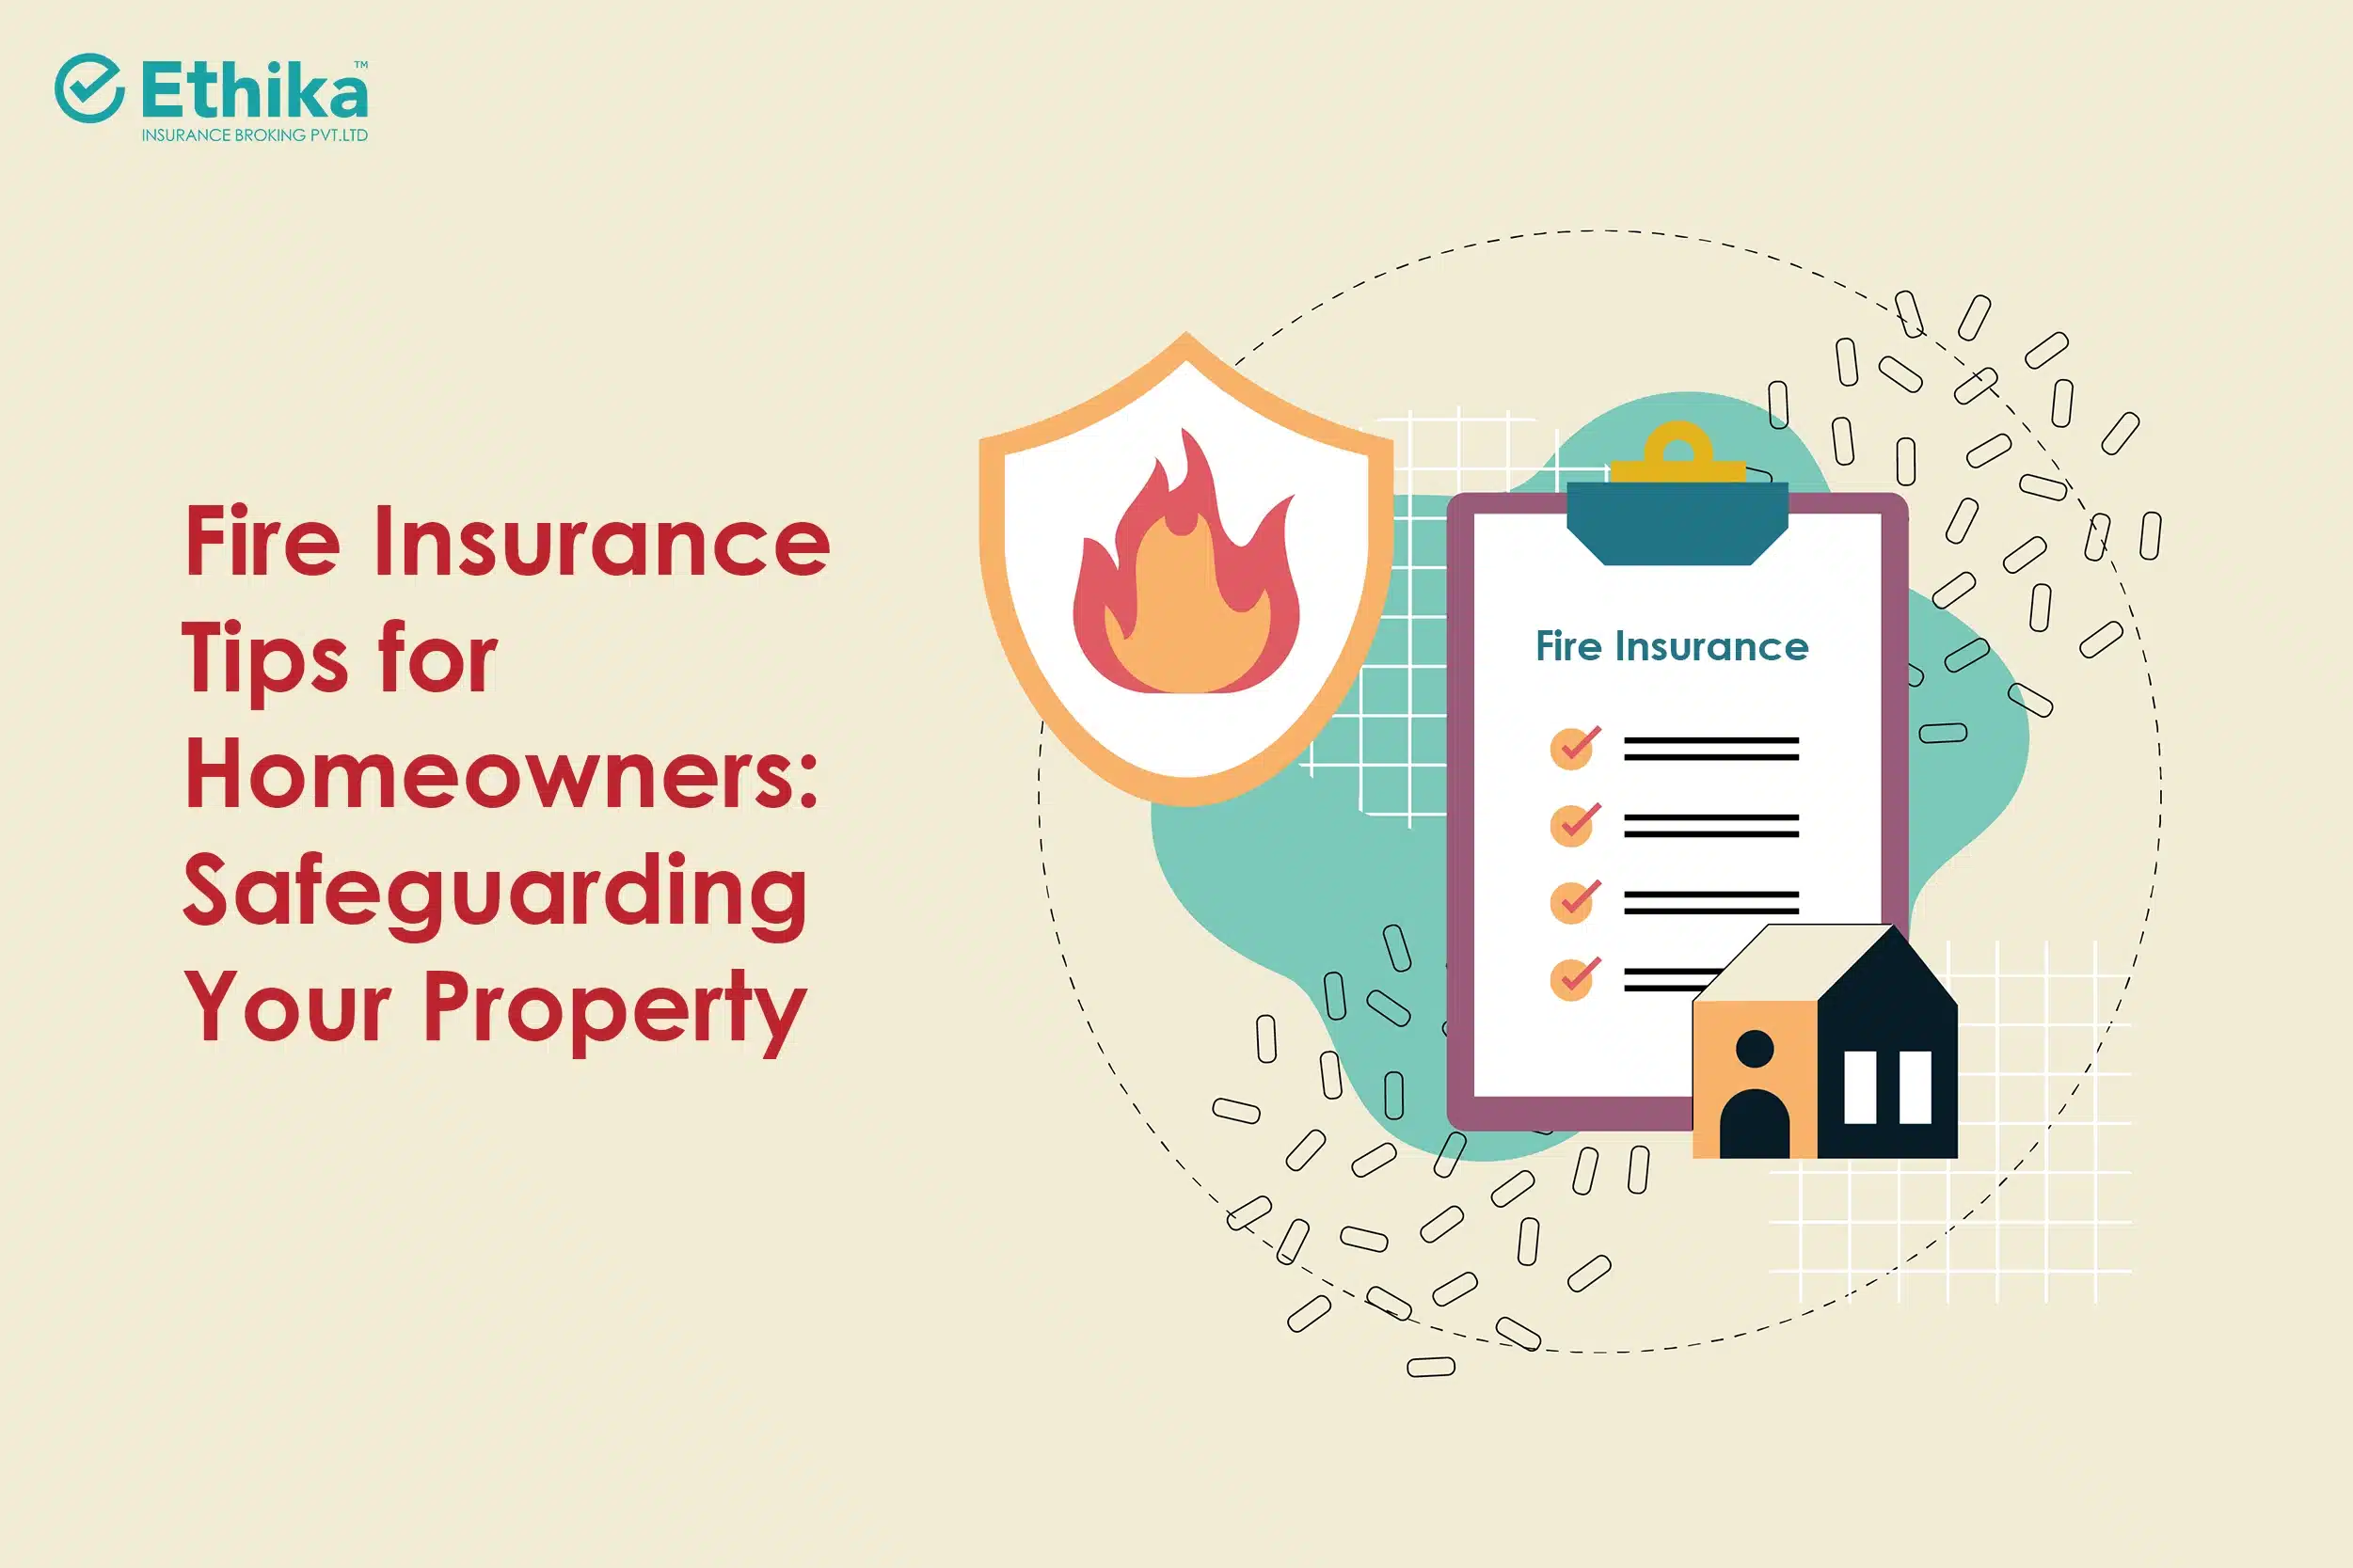 Fire Insurance Tips for Homeowners